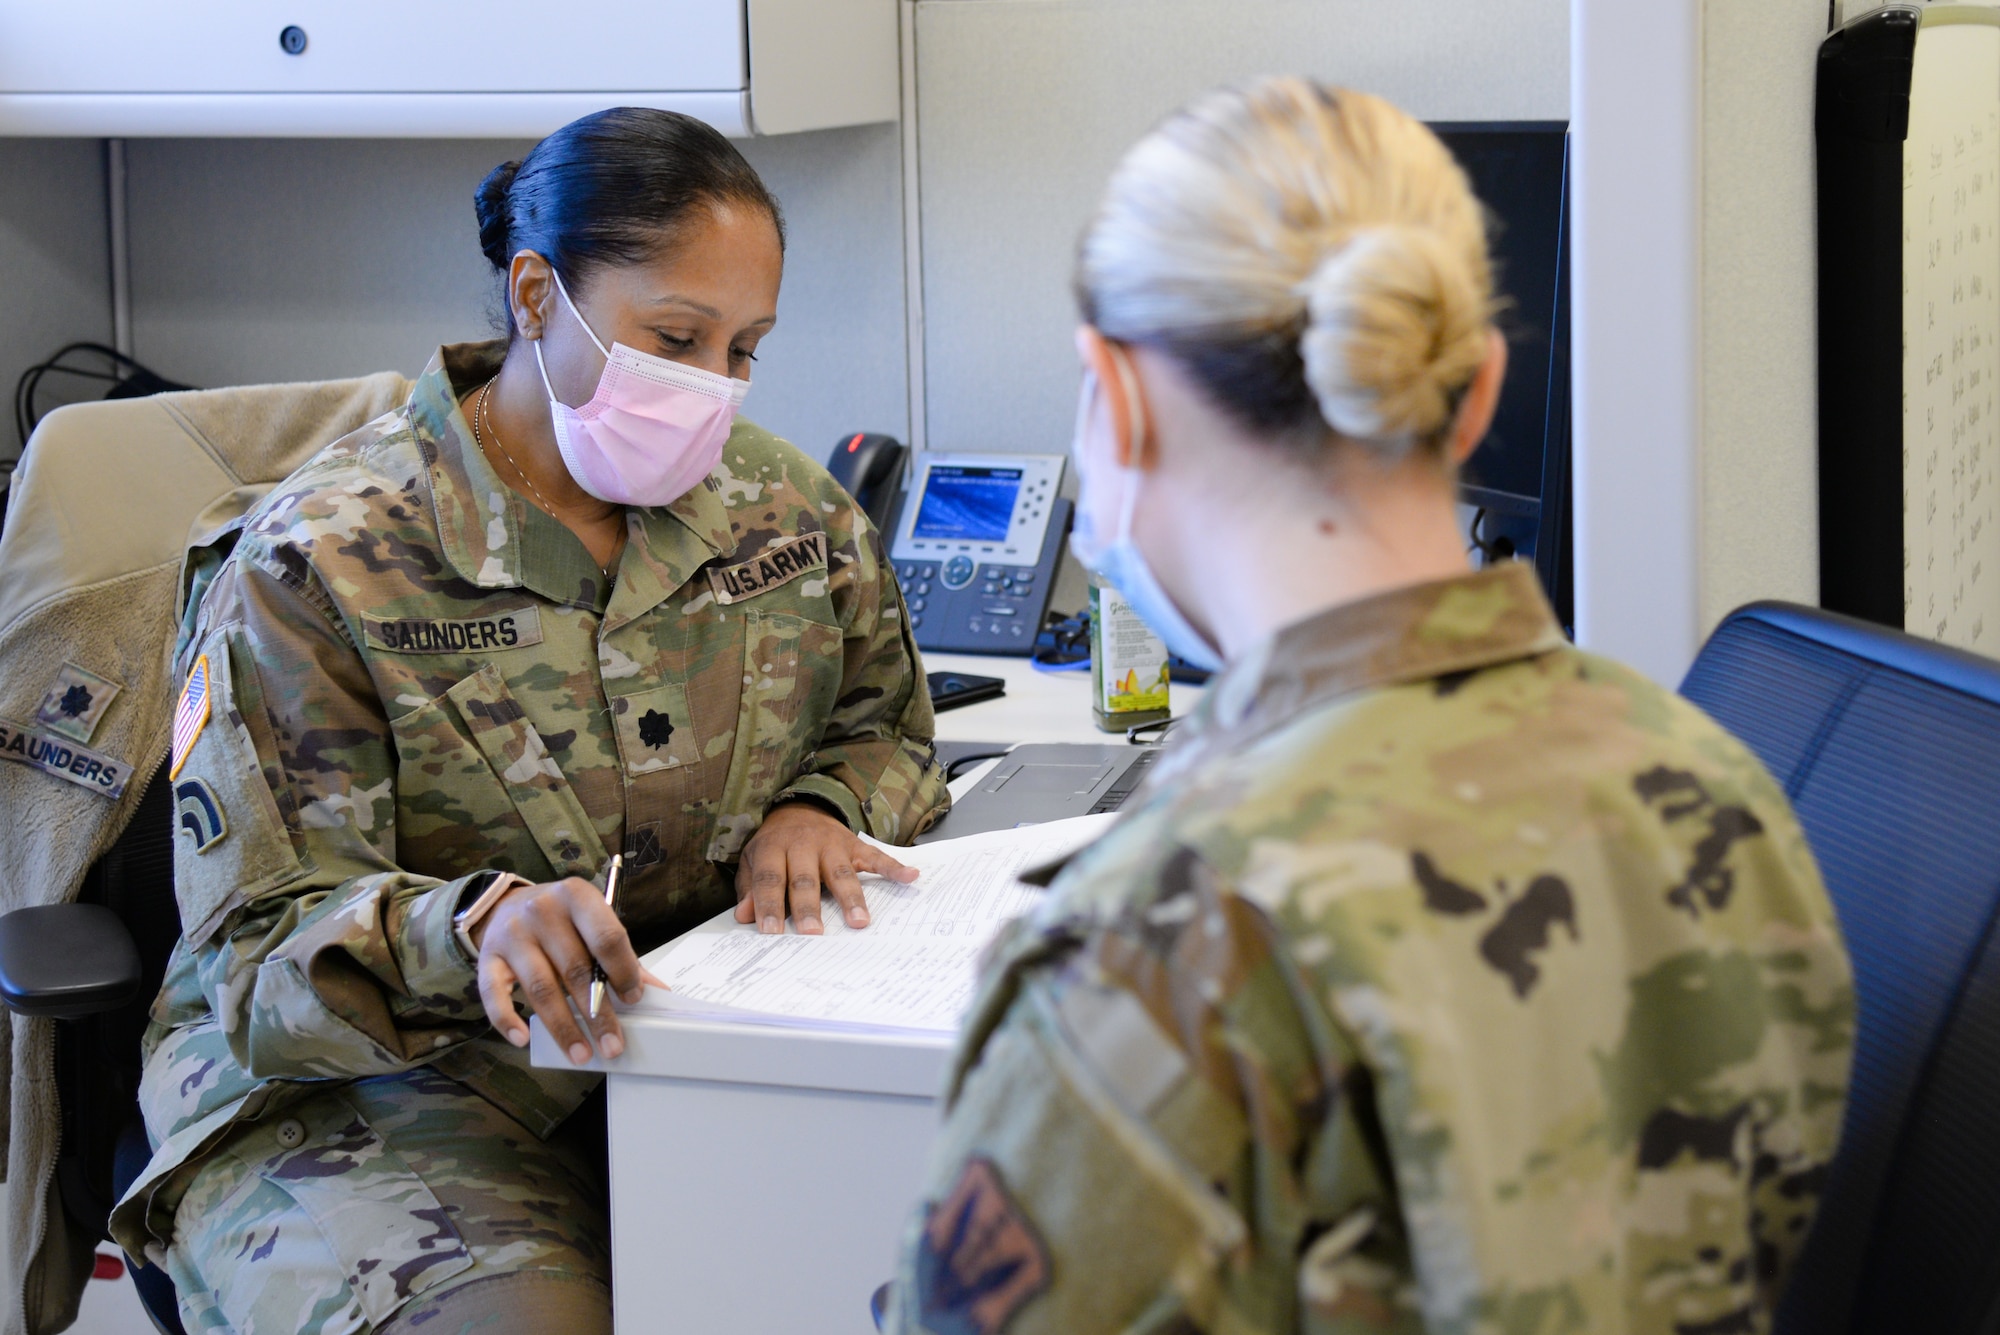 U.S. Army Lt. Col. Lorraine Saunders, 44th Infantry Brigade Combat Team brigadier surgeon, left, reviews the paperwork of U.S. Air Force Airman lauren A. Paduani, 177th Logistics Readiness Squadron traffic management office specialist, Jan. 13, 2021, at the New Jersey National Guard Base, Sea Girt, N.J. The out-process included a briefing, medical examinations and a sit-down with administration. (U.S. Air National Guard photo by Airman 1st Class Hunter Hires)